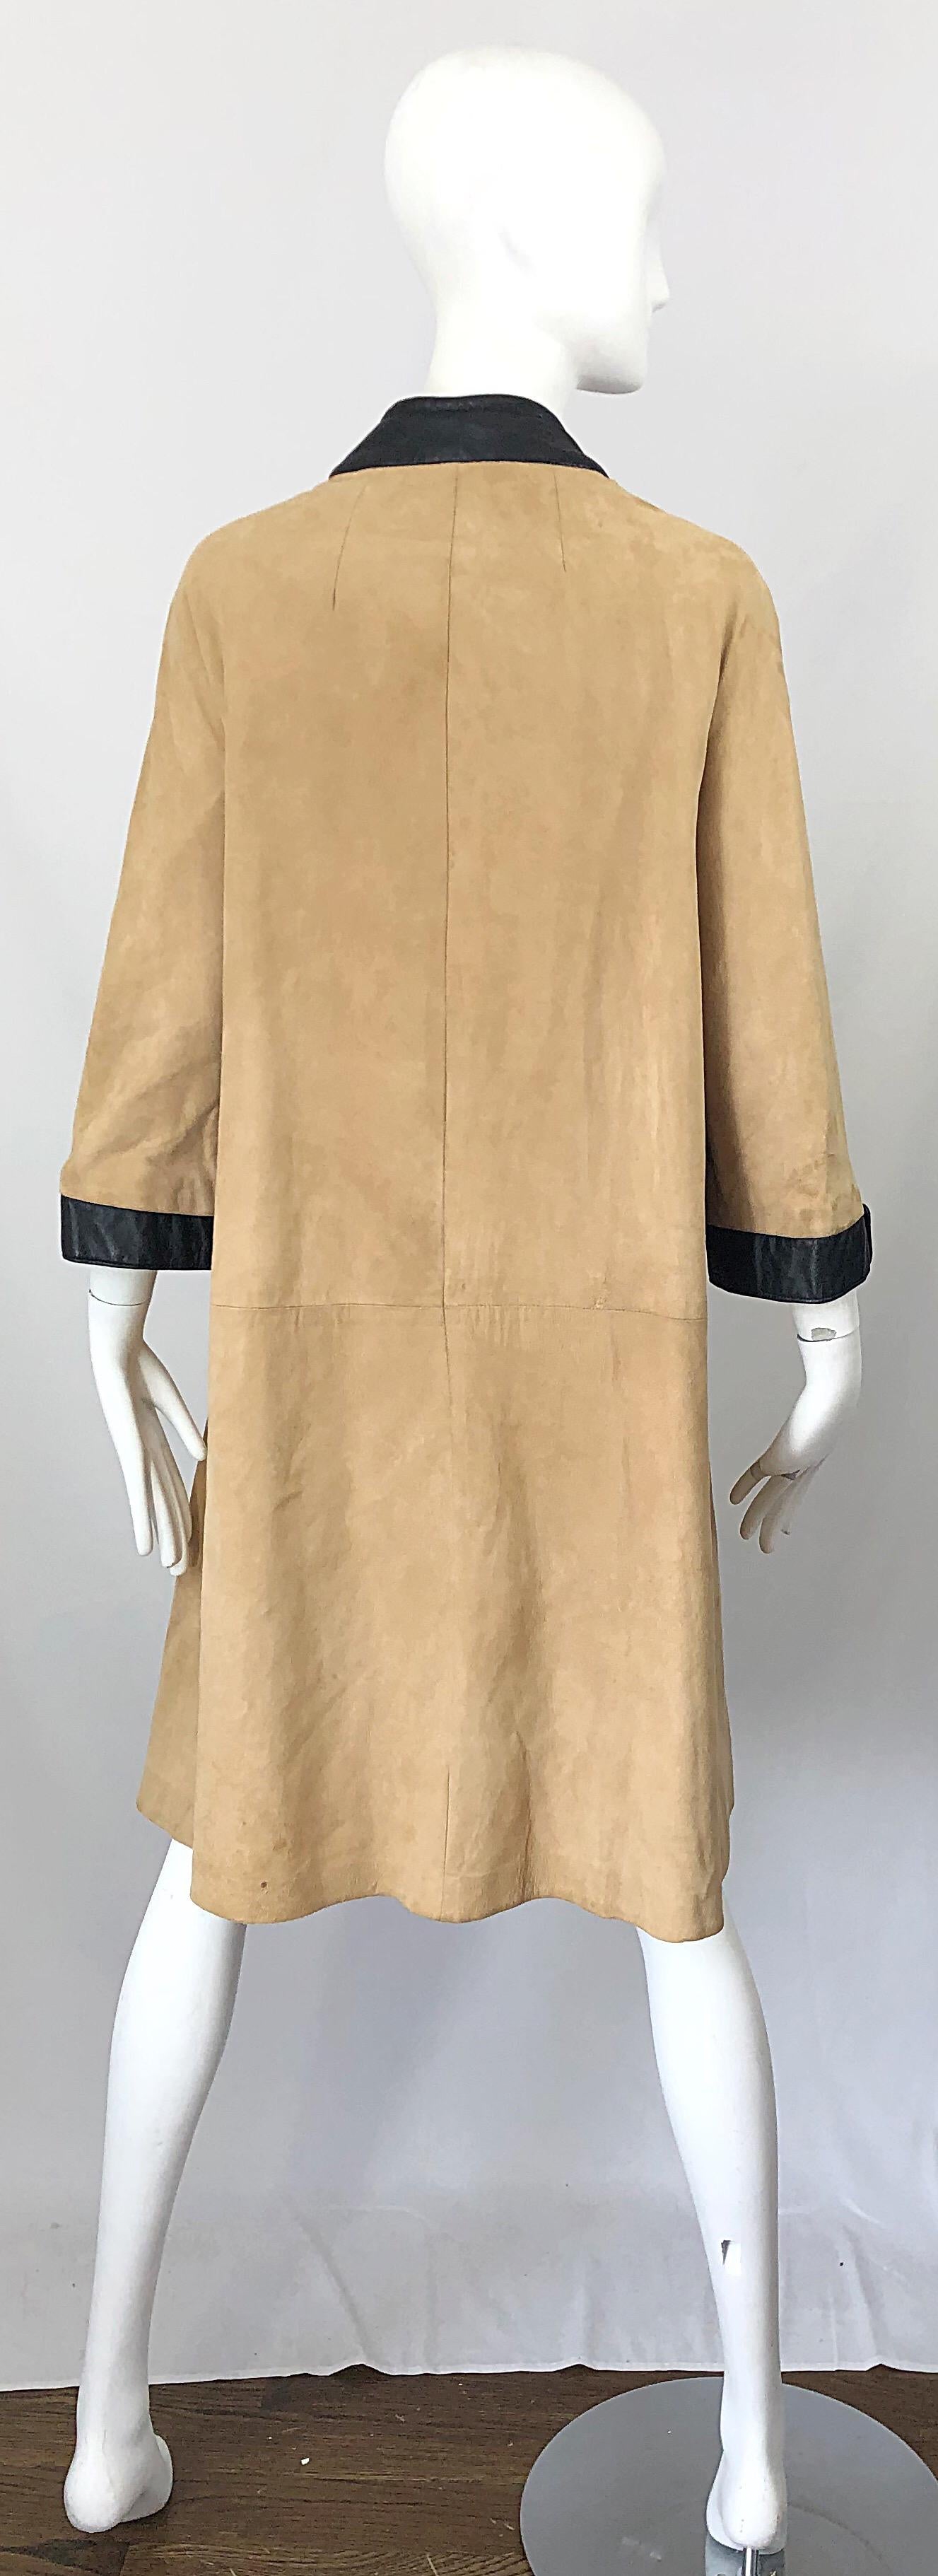 1960s Lillie Rubin Tan + Black Suede and Leather Vintage 60s Swing Jacket Coat 6